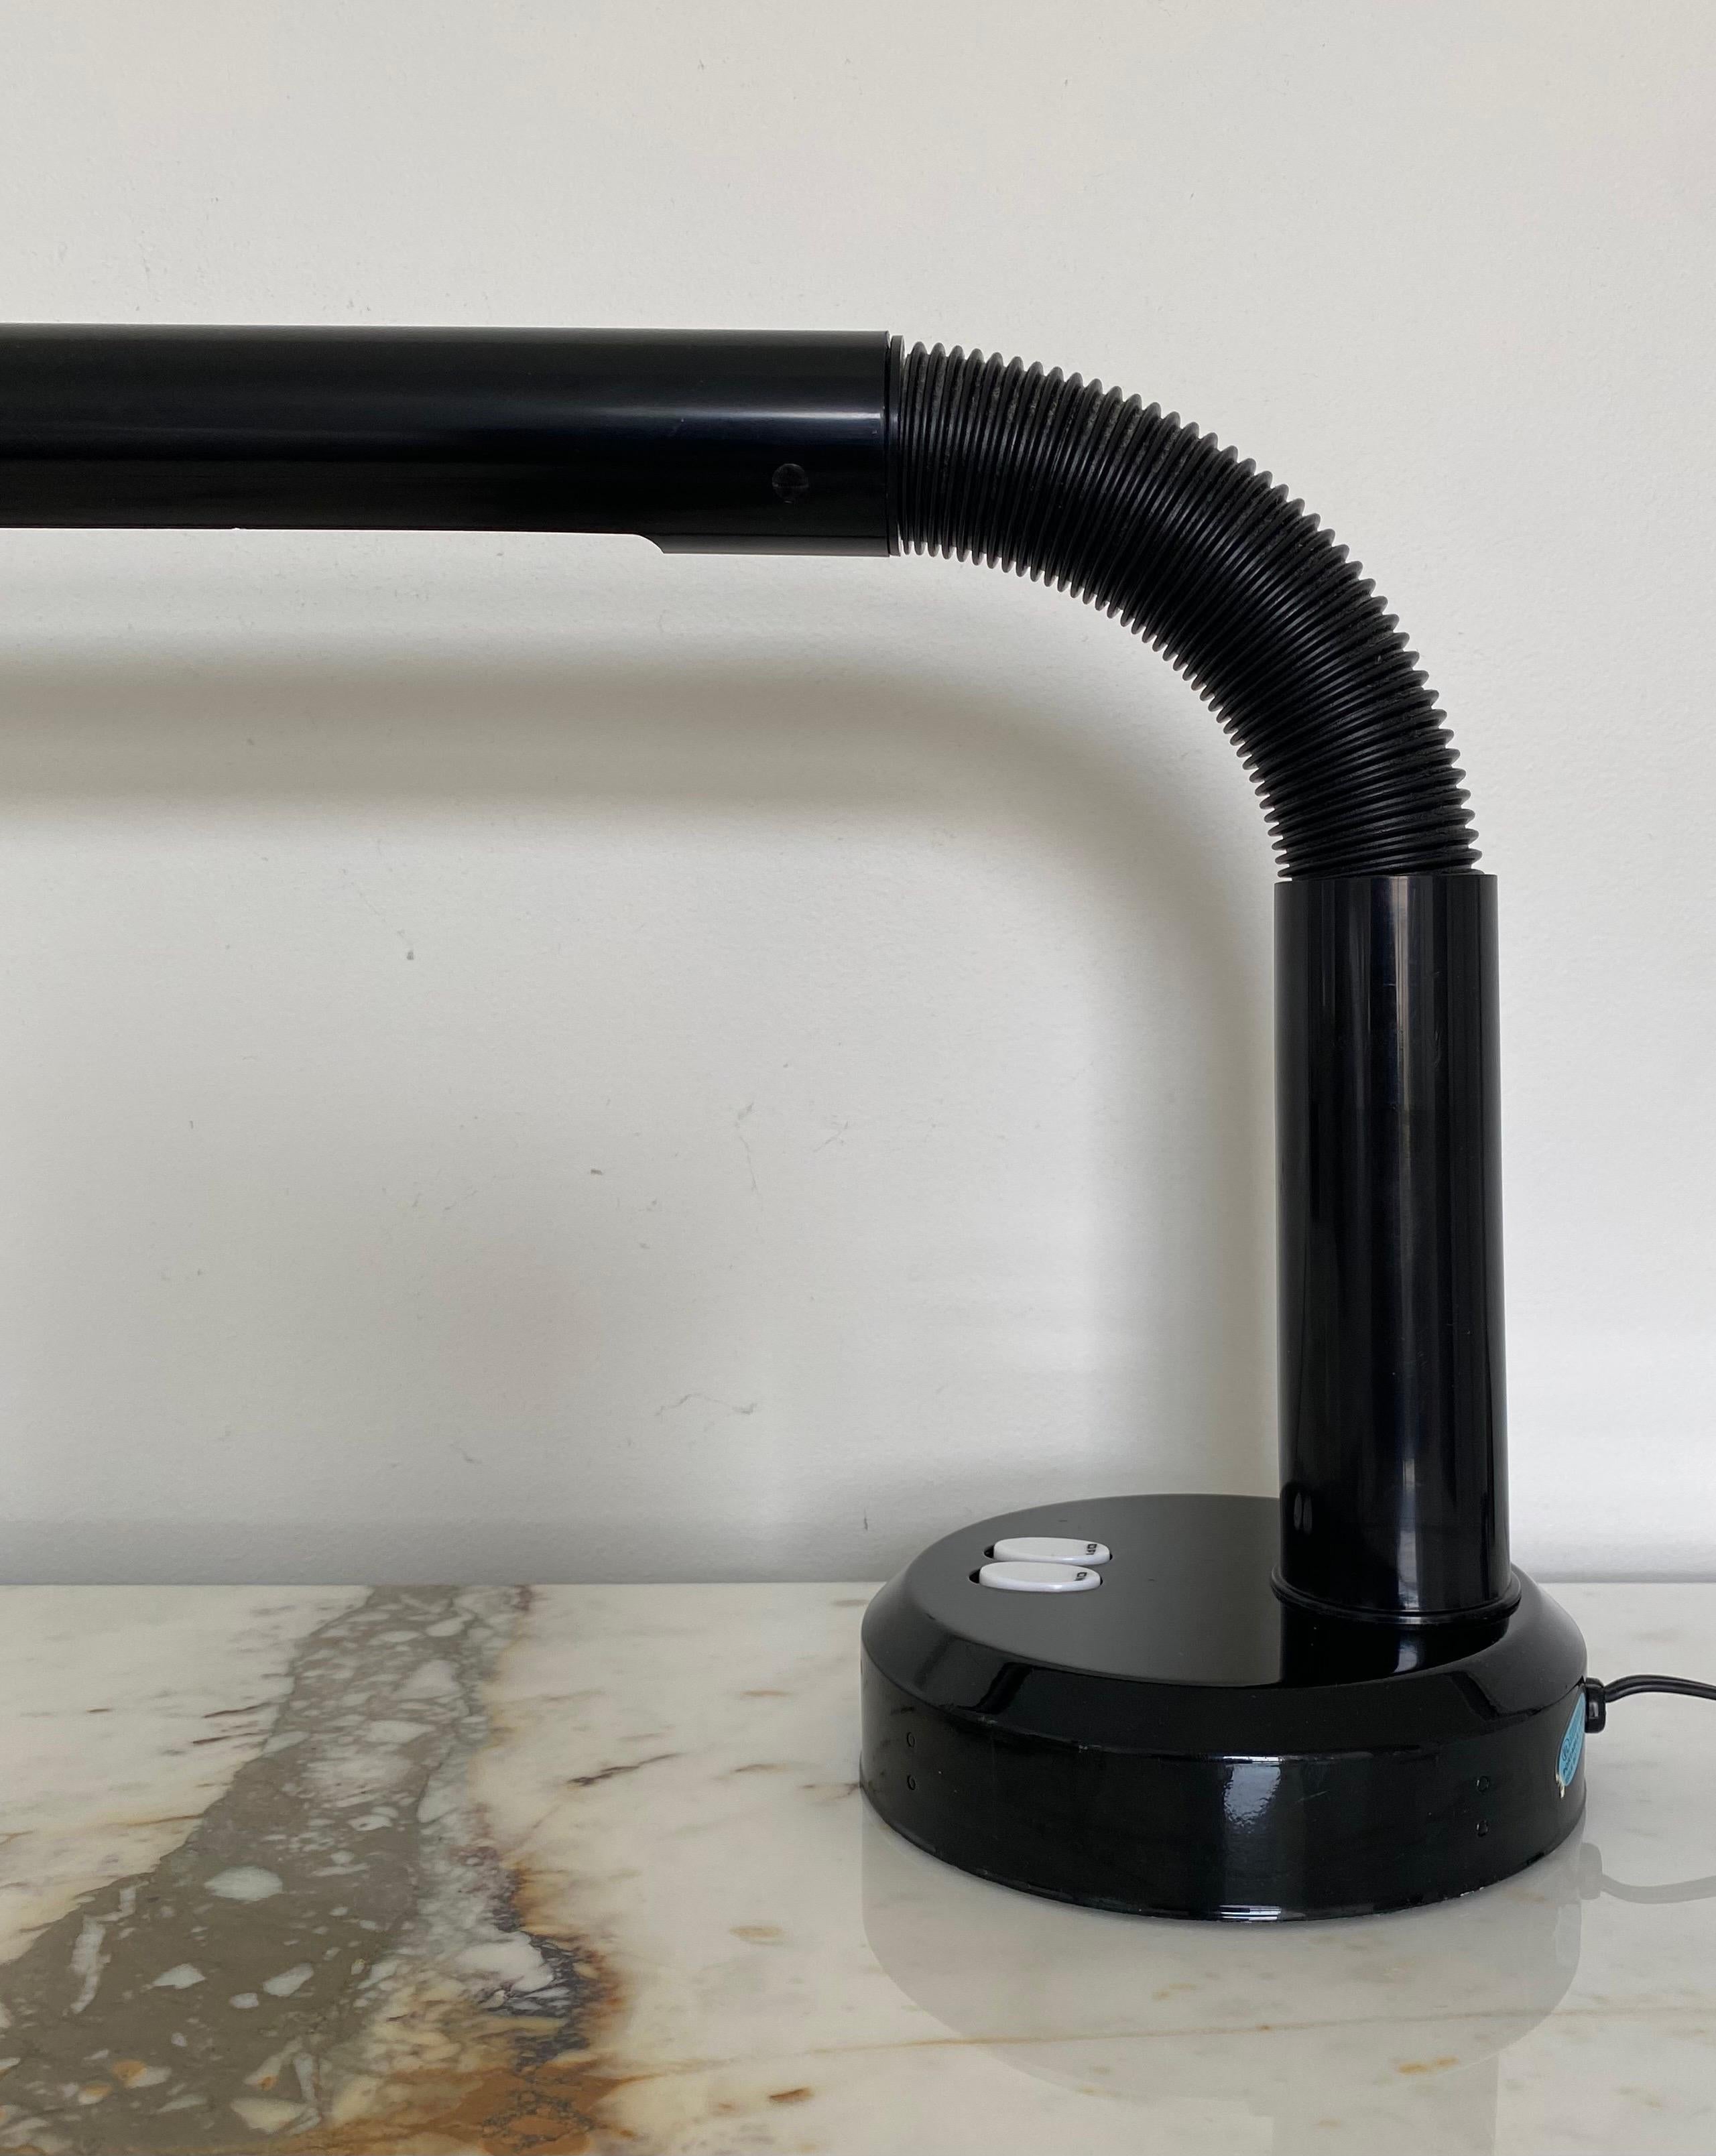 Post Modern tubular task desk lamp in the style of Swedish designer Anders Pehrson.  This highly functional linear table lamp features a sleek tubular shade that is bendable to direct the light beam as desired.  This black high gloss lamp is in